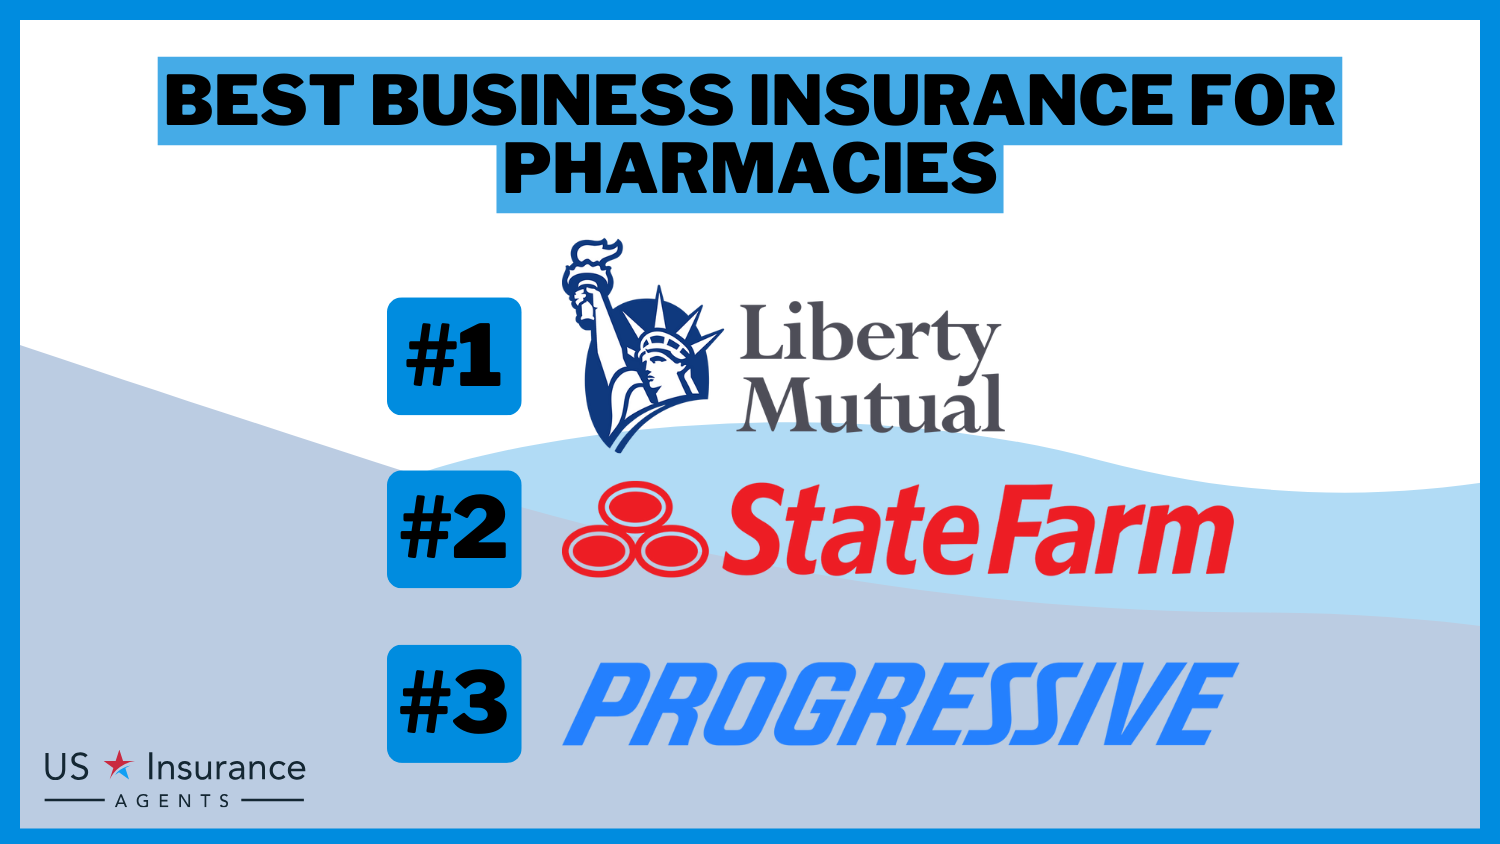 3 Best Business Insurance for Pharmacies: Liberty Mutual, State Farm and Progressive.